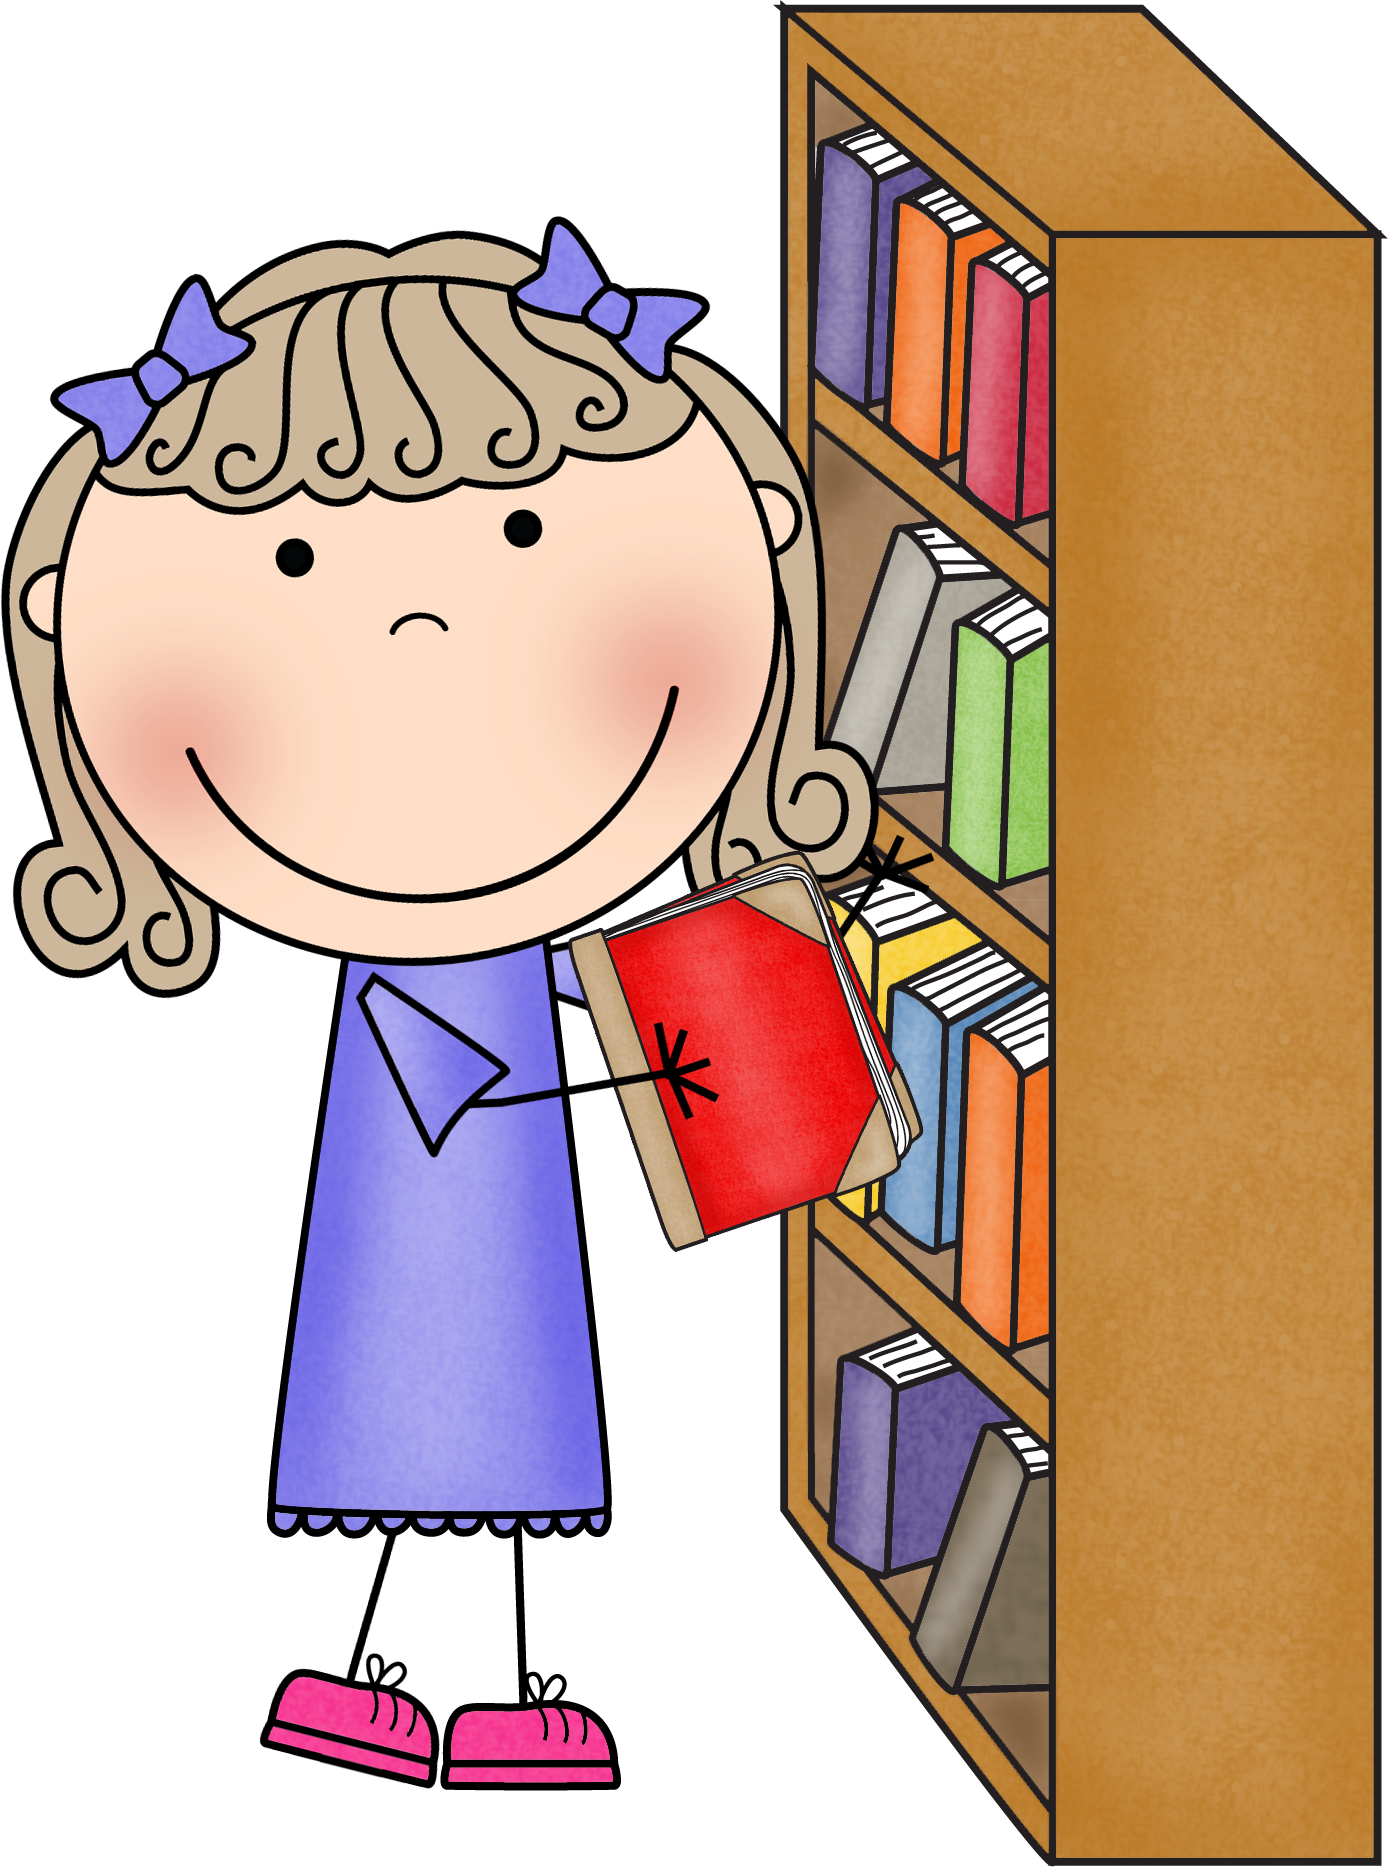 uvic clipart library - photo #32